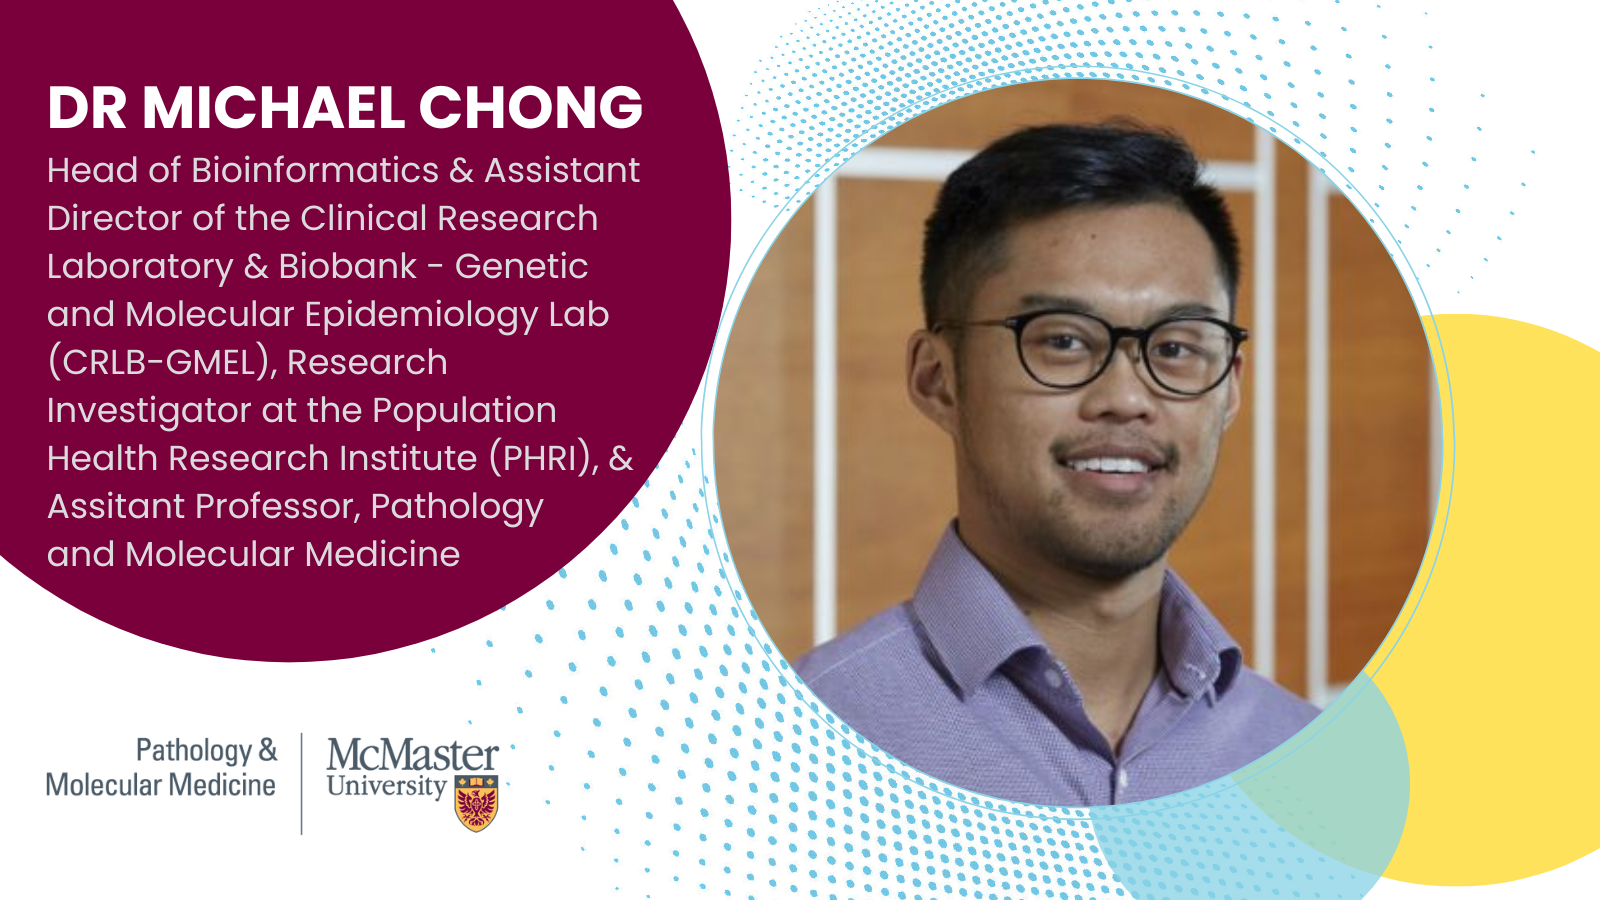 Dr Michael Chong Head of Bioinformatics & Assistant Director of the Clinical Research Laboratory & Biobank - Genetic and Molecular Epidemiology Lab (CRLB-GMEL), Research Investigator at the Population Health Research Institute (PHRI), & Assitant Professor, Pathology and Molecular Medicine